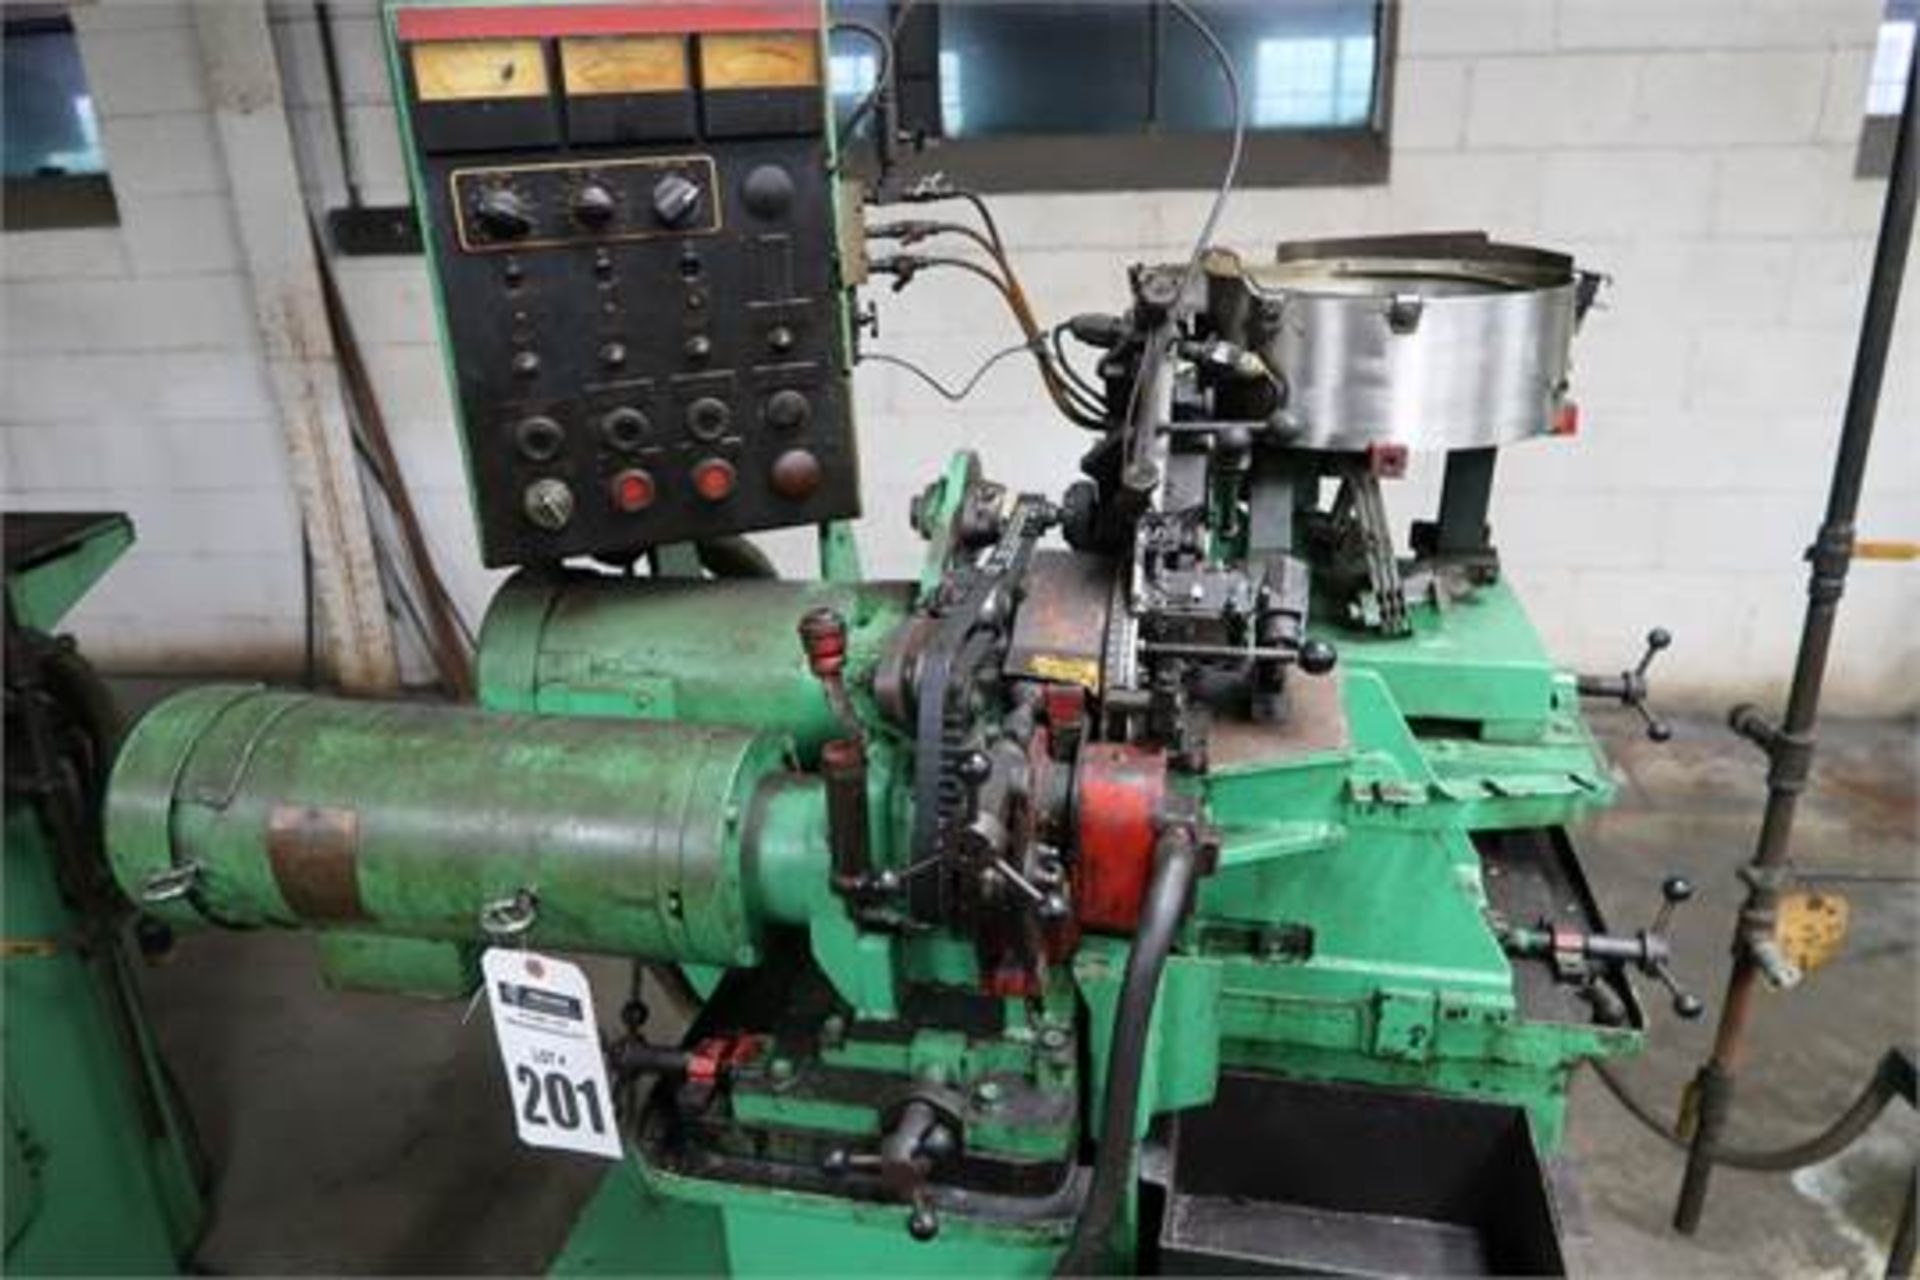 Warren Ws-500 Slotter With Vibratory Bowl Feeder, S/N D117648 - Image 3 of 3